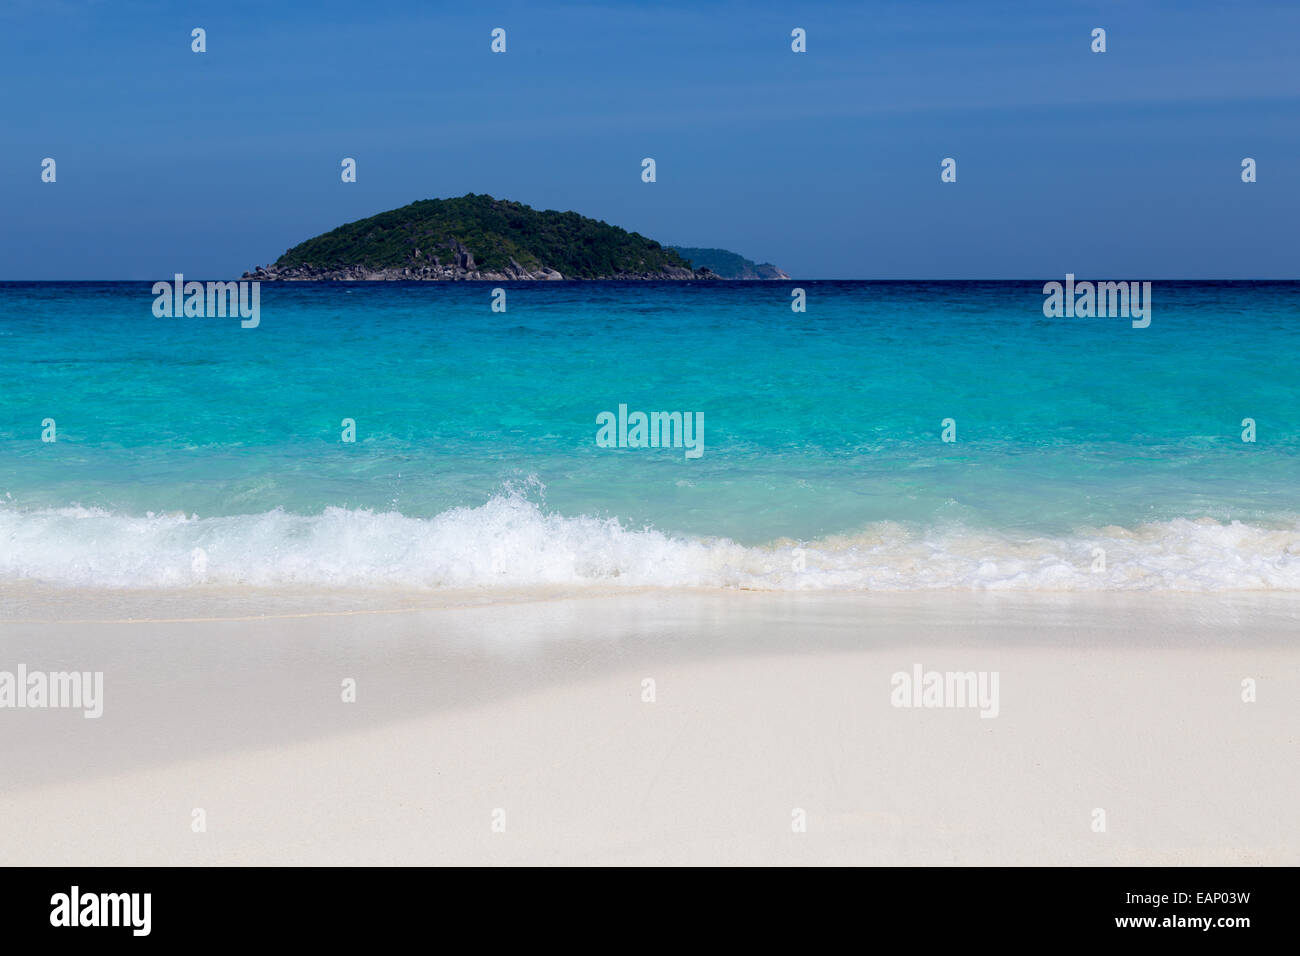 White sand beach and turquoise blue sea under a blue sky. Stock Photo